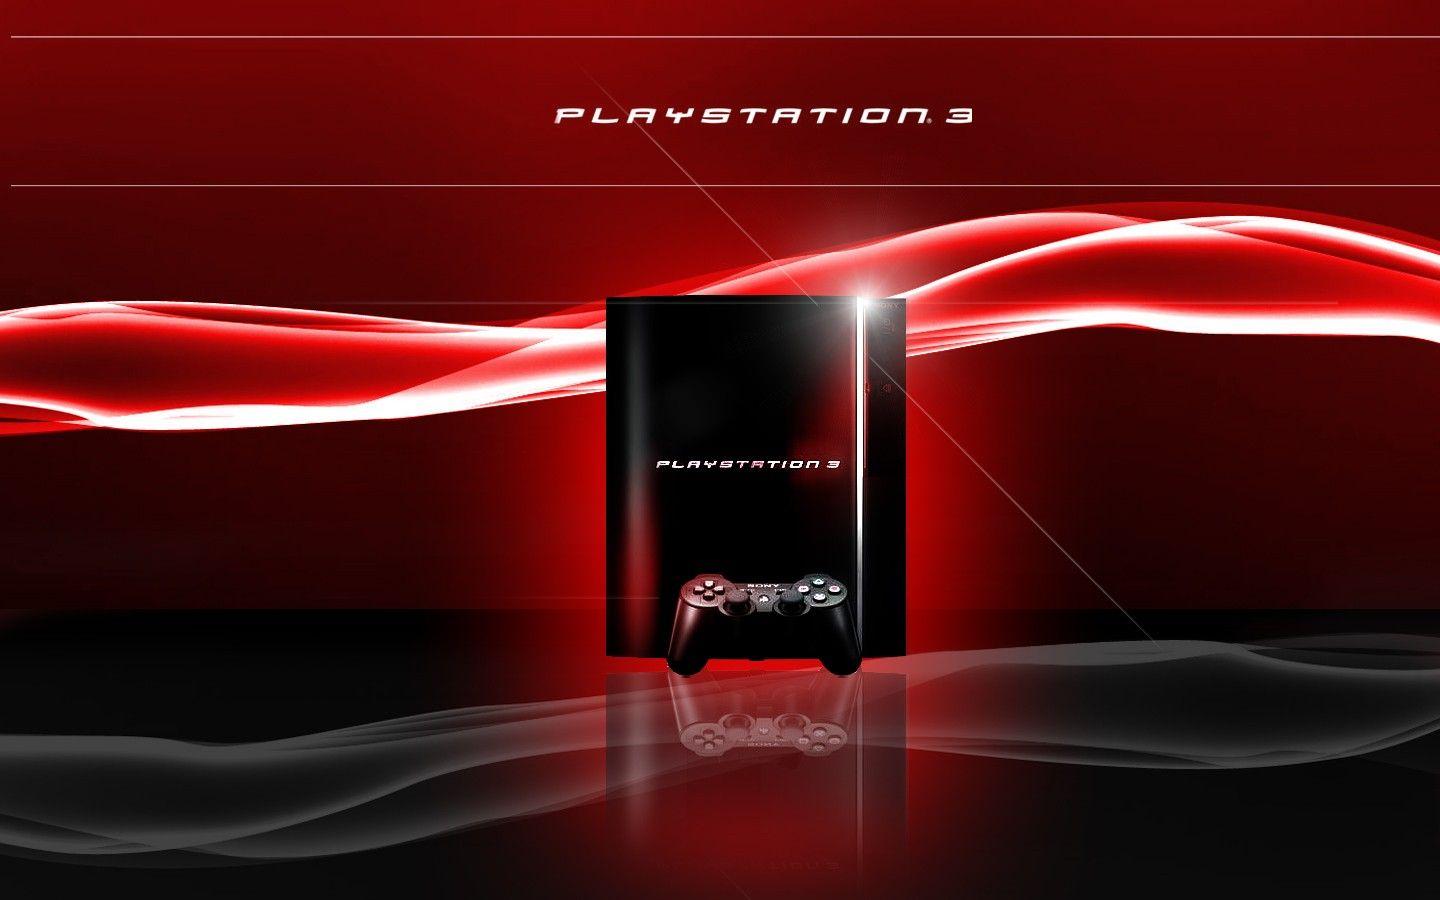 Sony Outs a New PlayStation 3 Firmware Version 4.70